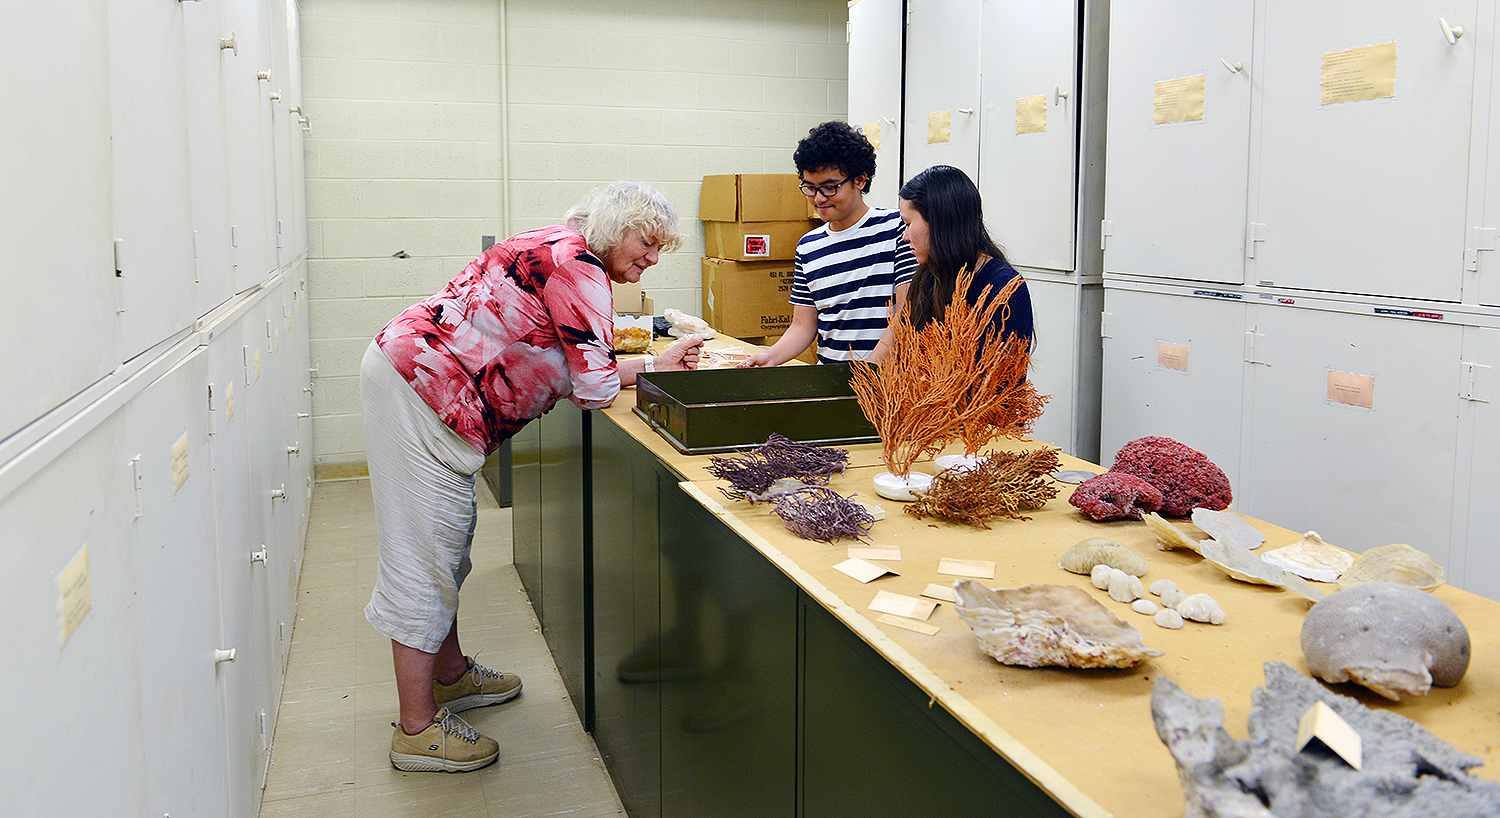 The research team also found dozens of coral samples stashed away above these cabinets in Exley Science Center. 